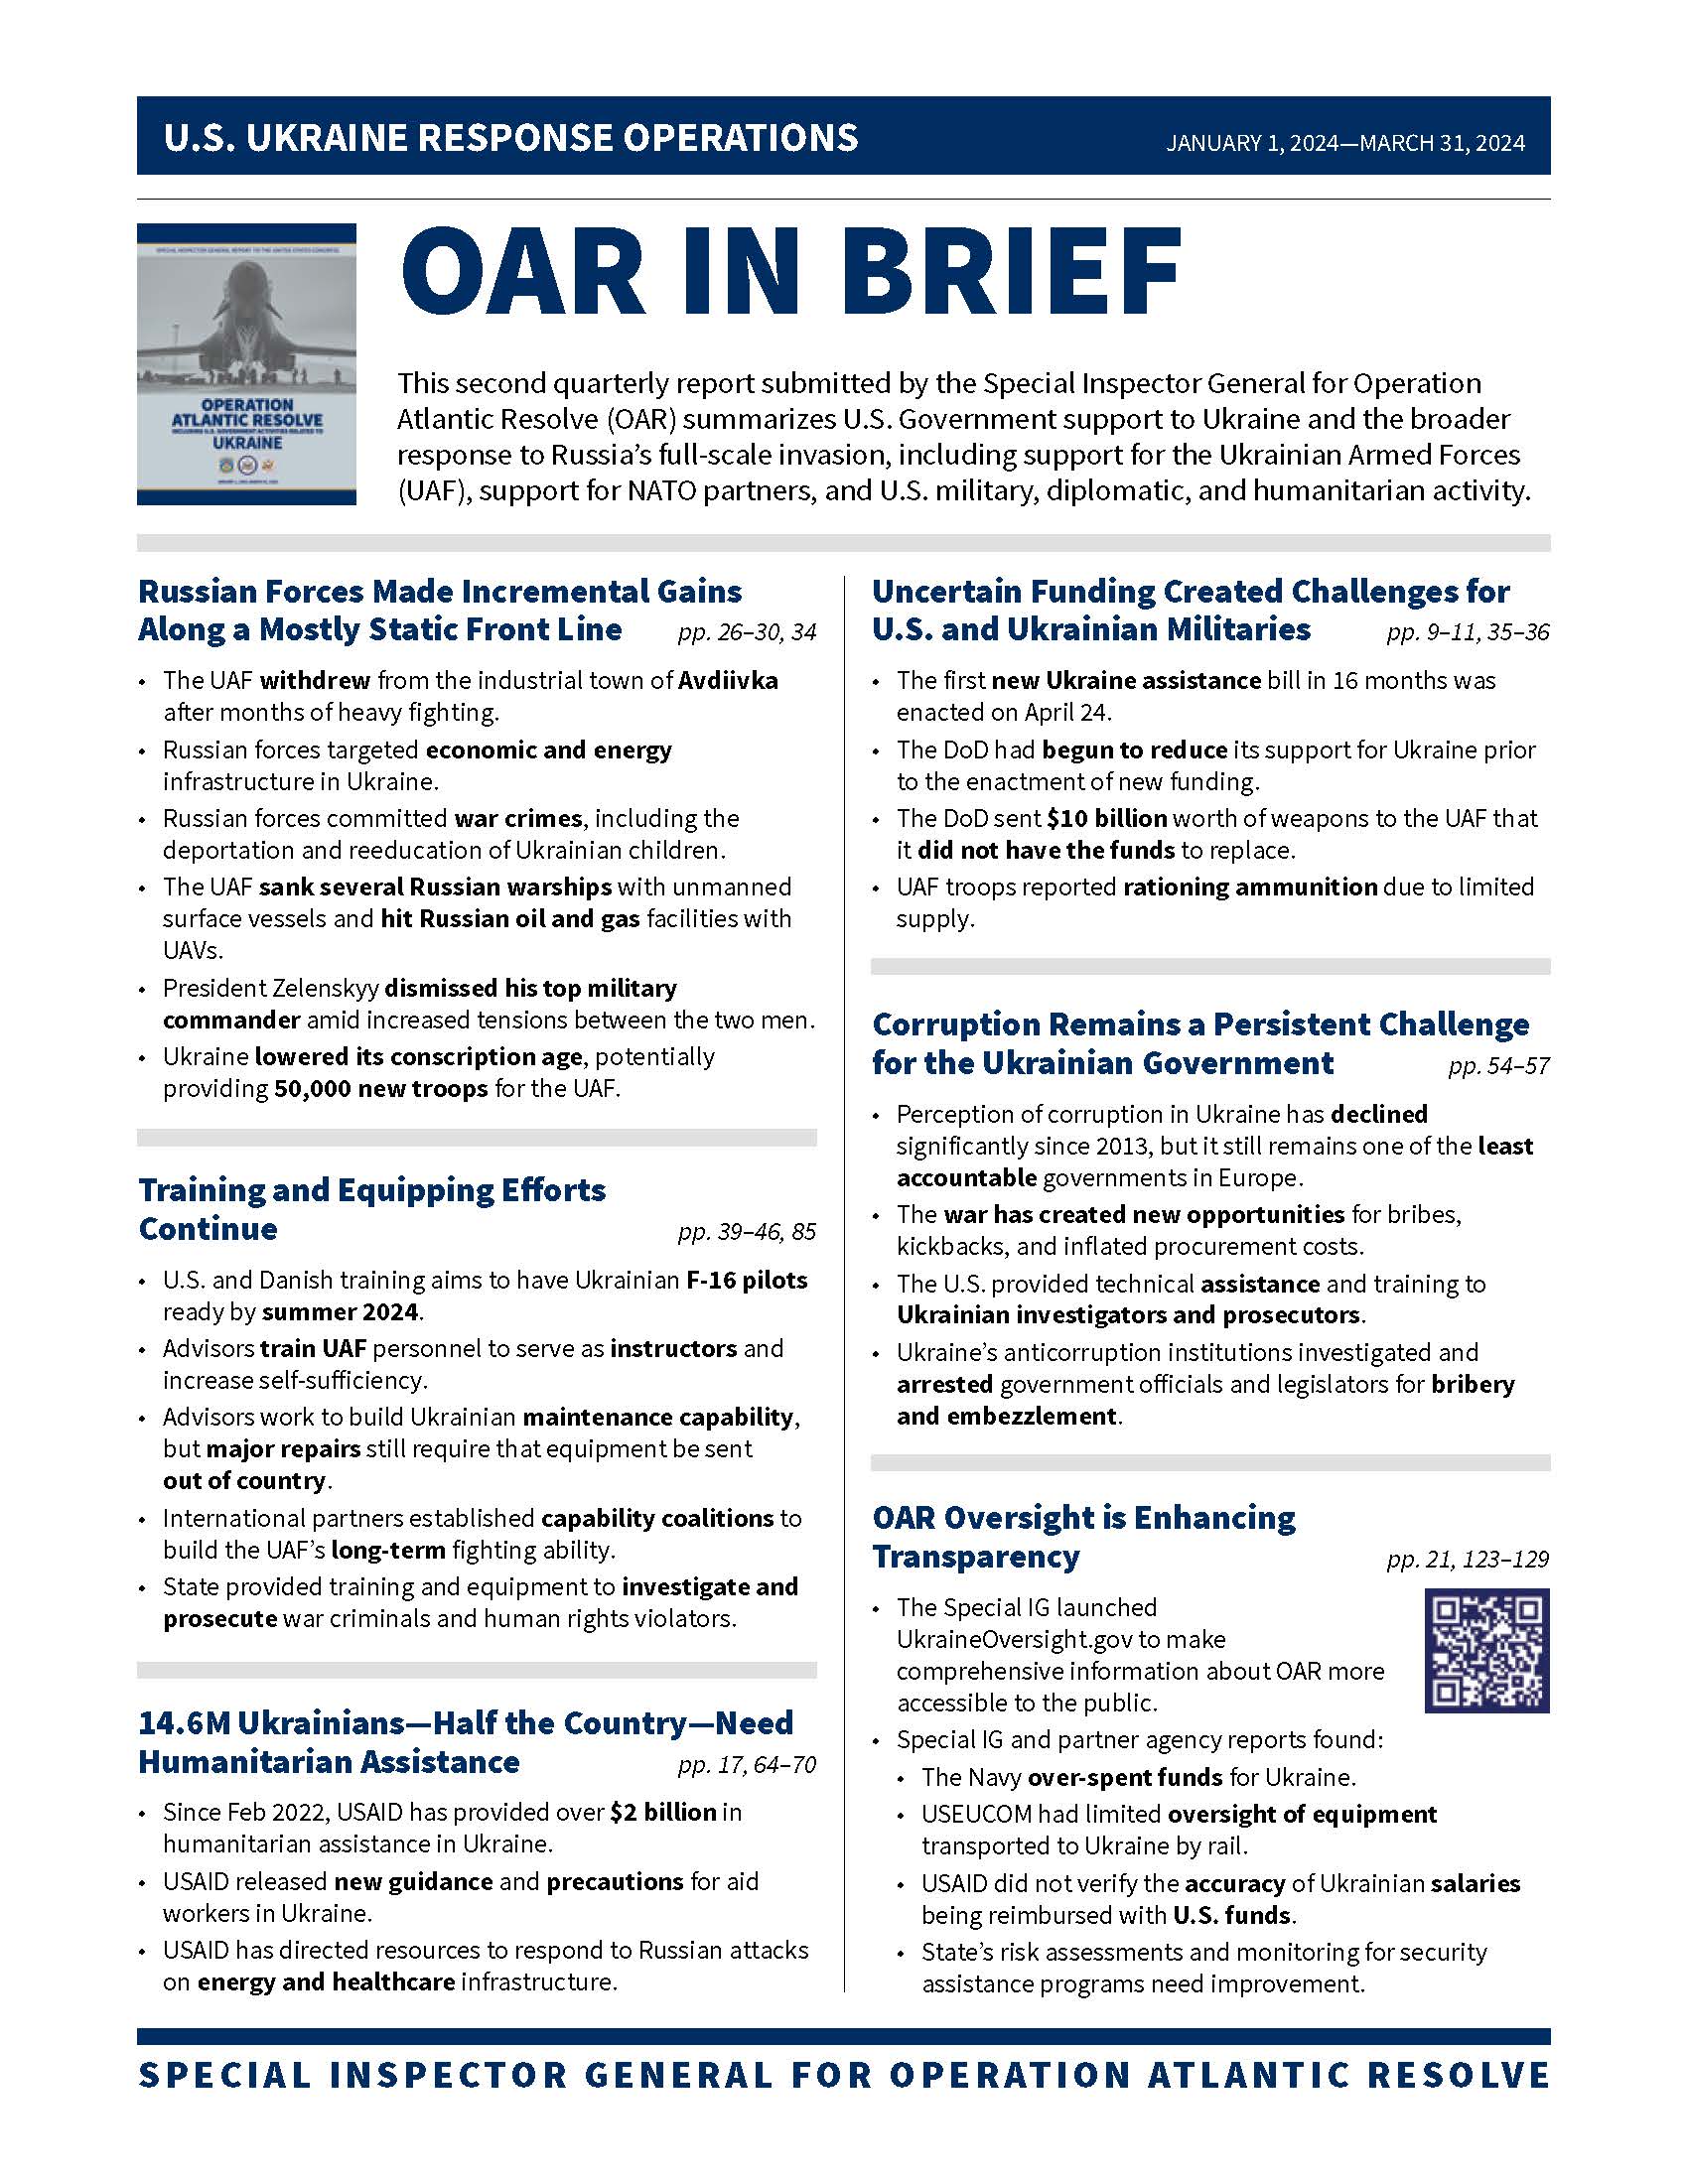 OAR FY24 Q2 One page overview